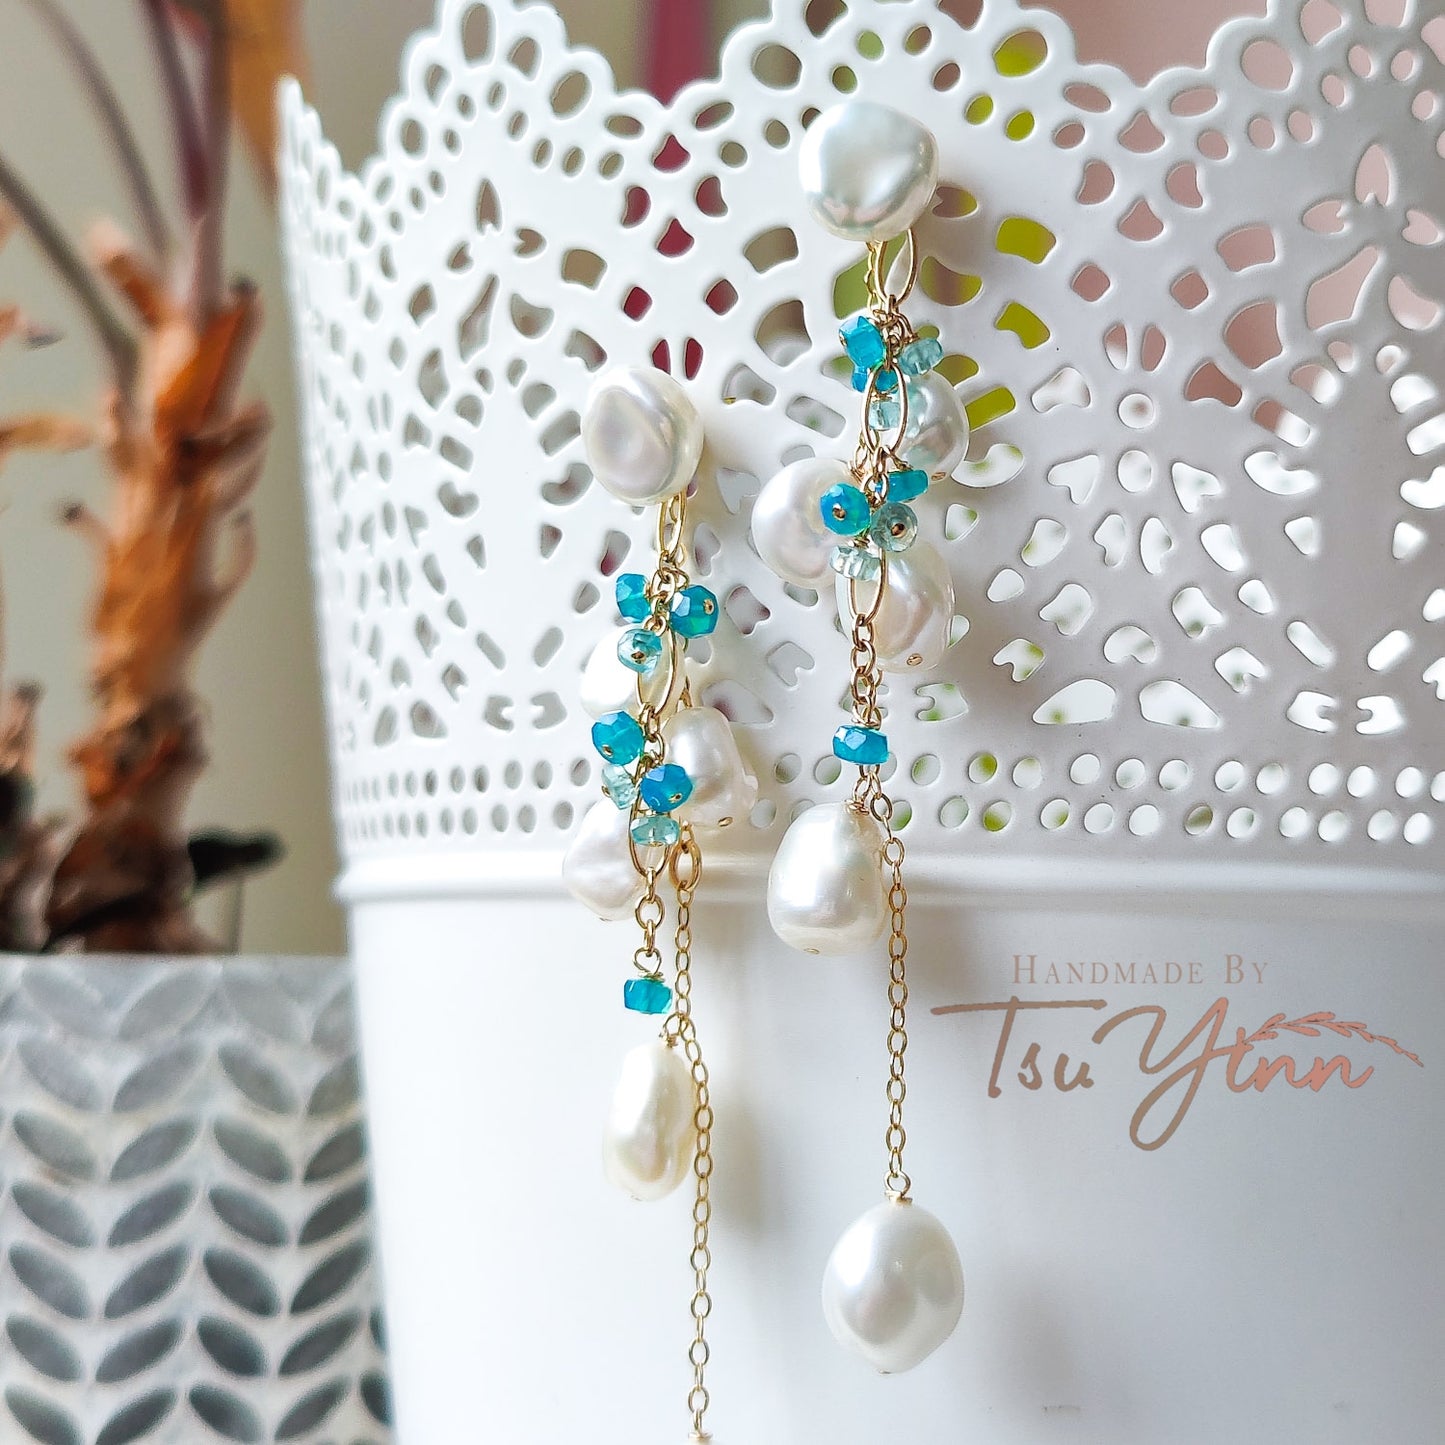 Multiwear Keshi Pearl Baubles Earrings with Blue Fire Opal and Aquamarine in YG